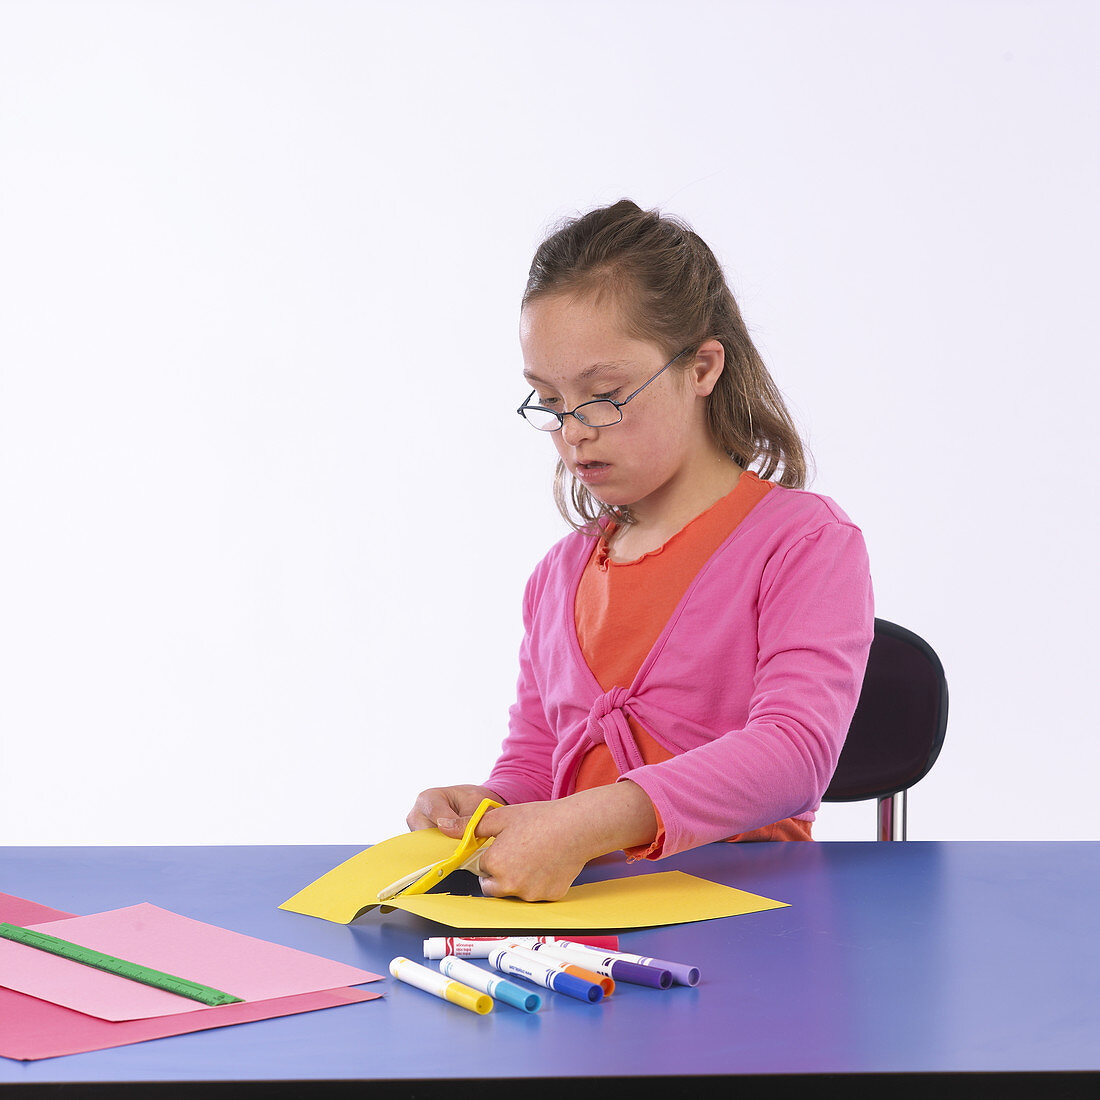 Girl with Special Needs Cutting Paper